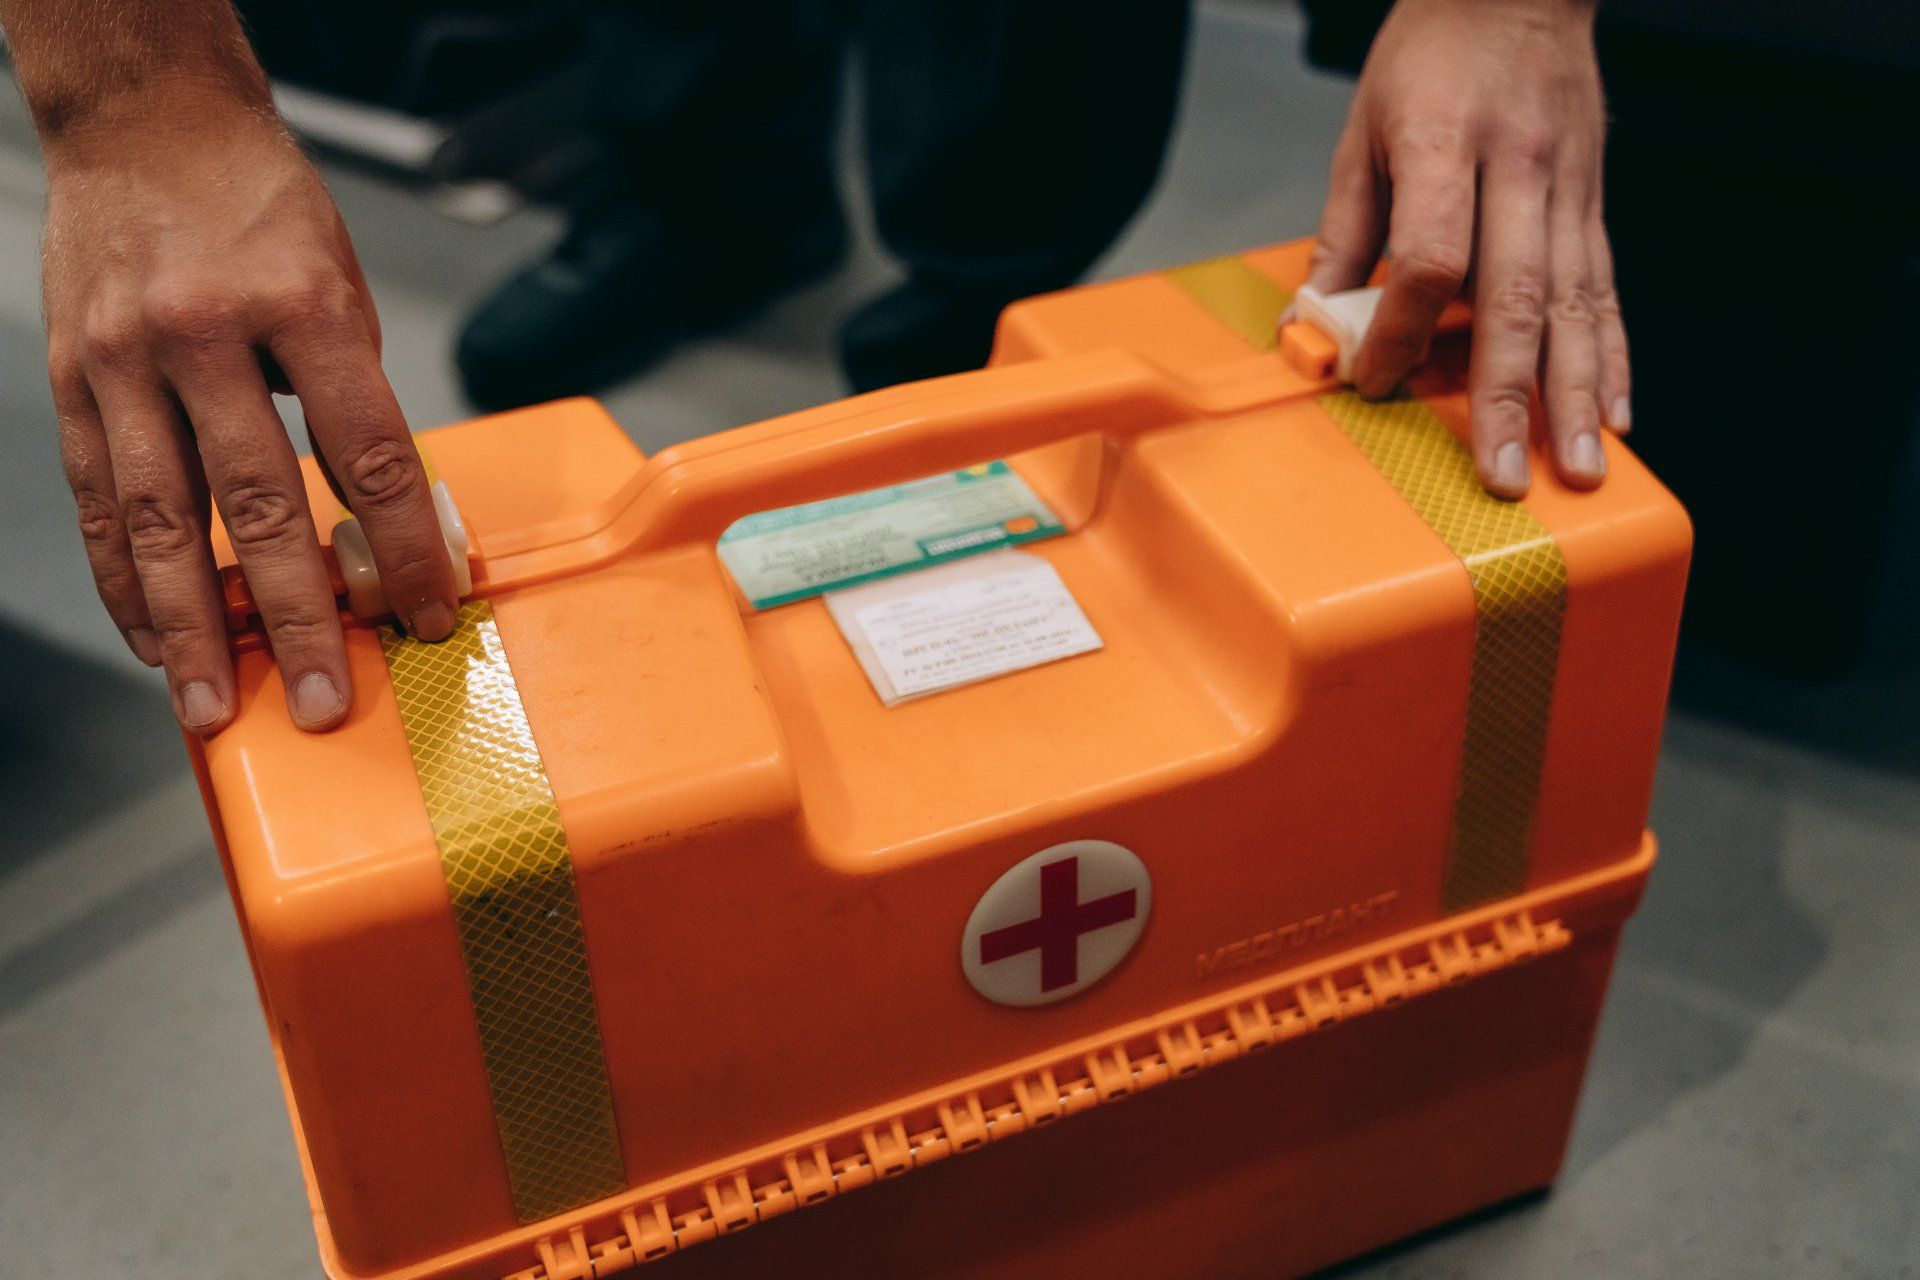 A person is holding a first aid kit in their hands.